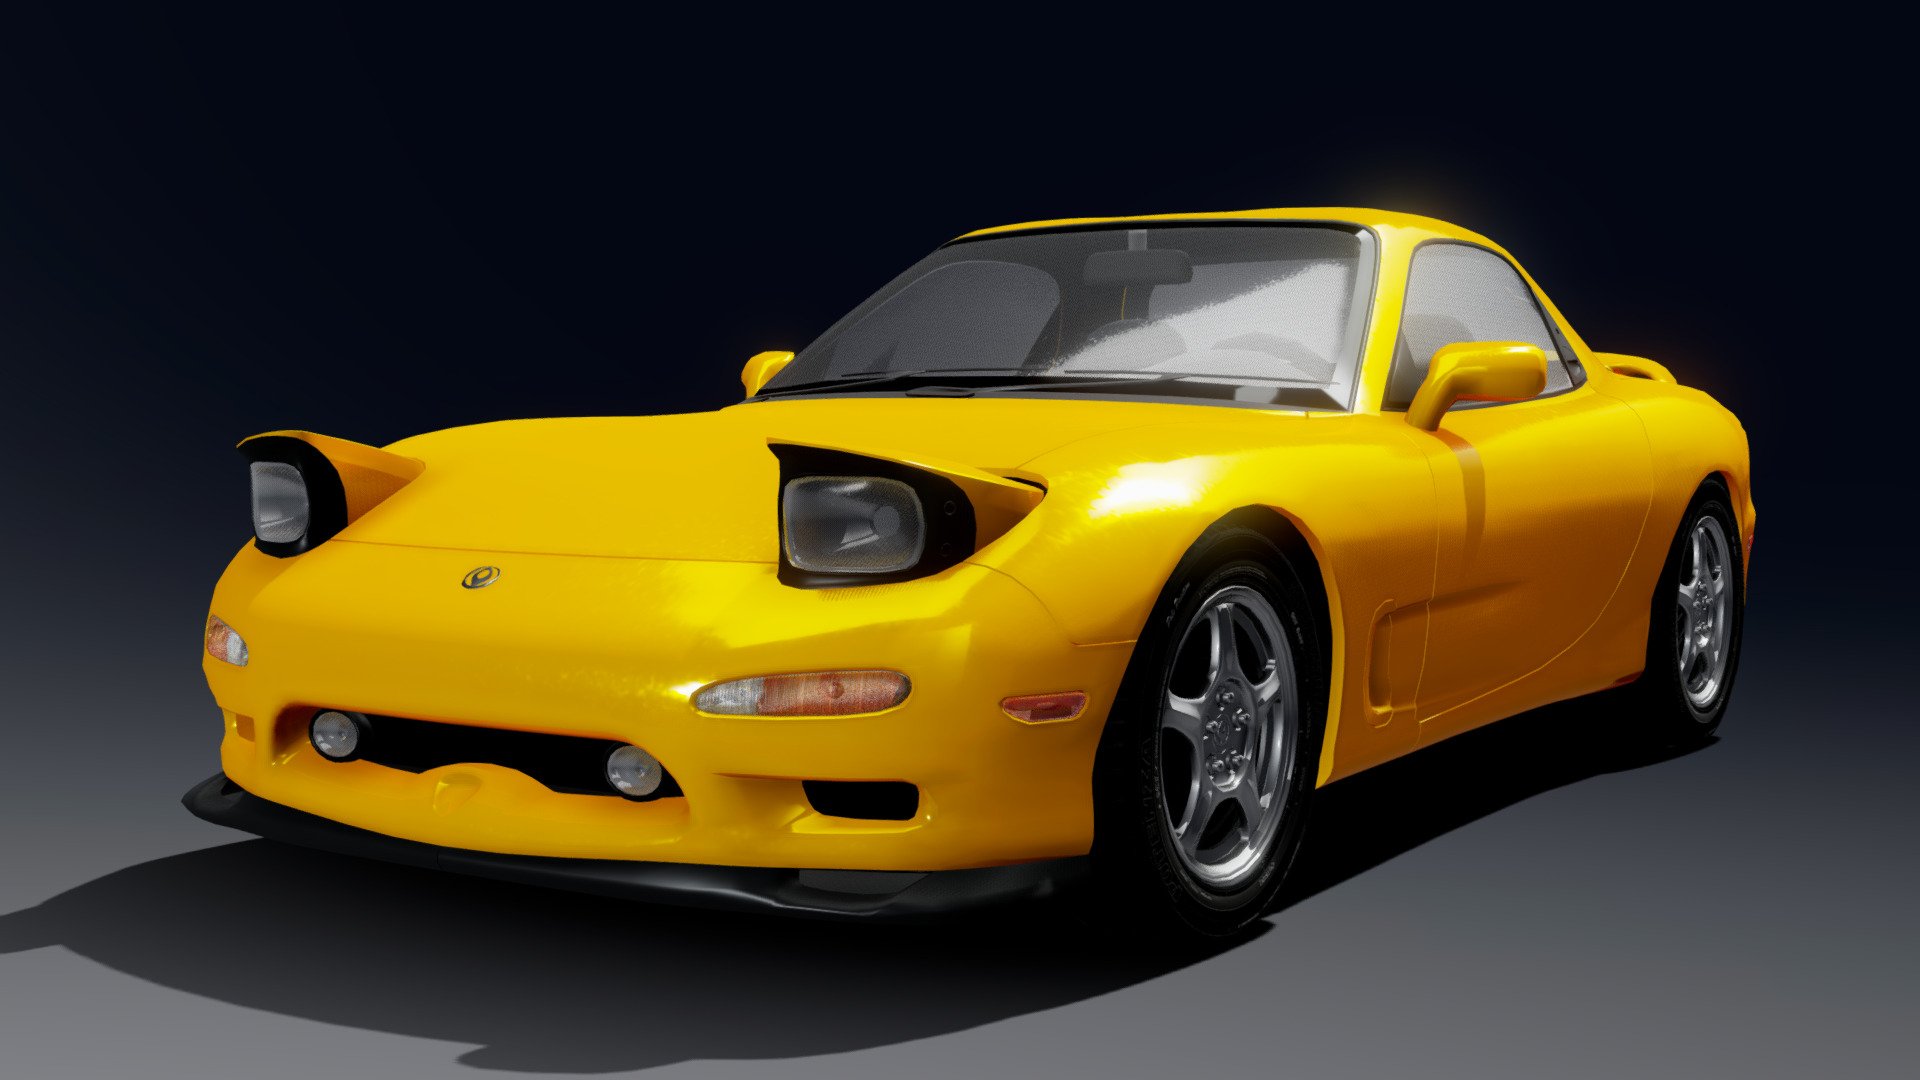 I was not satisfied with how my RX7 model looked, so I decided to remodel it and make it more presentable and accurate 3d model